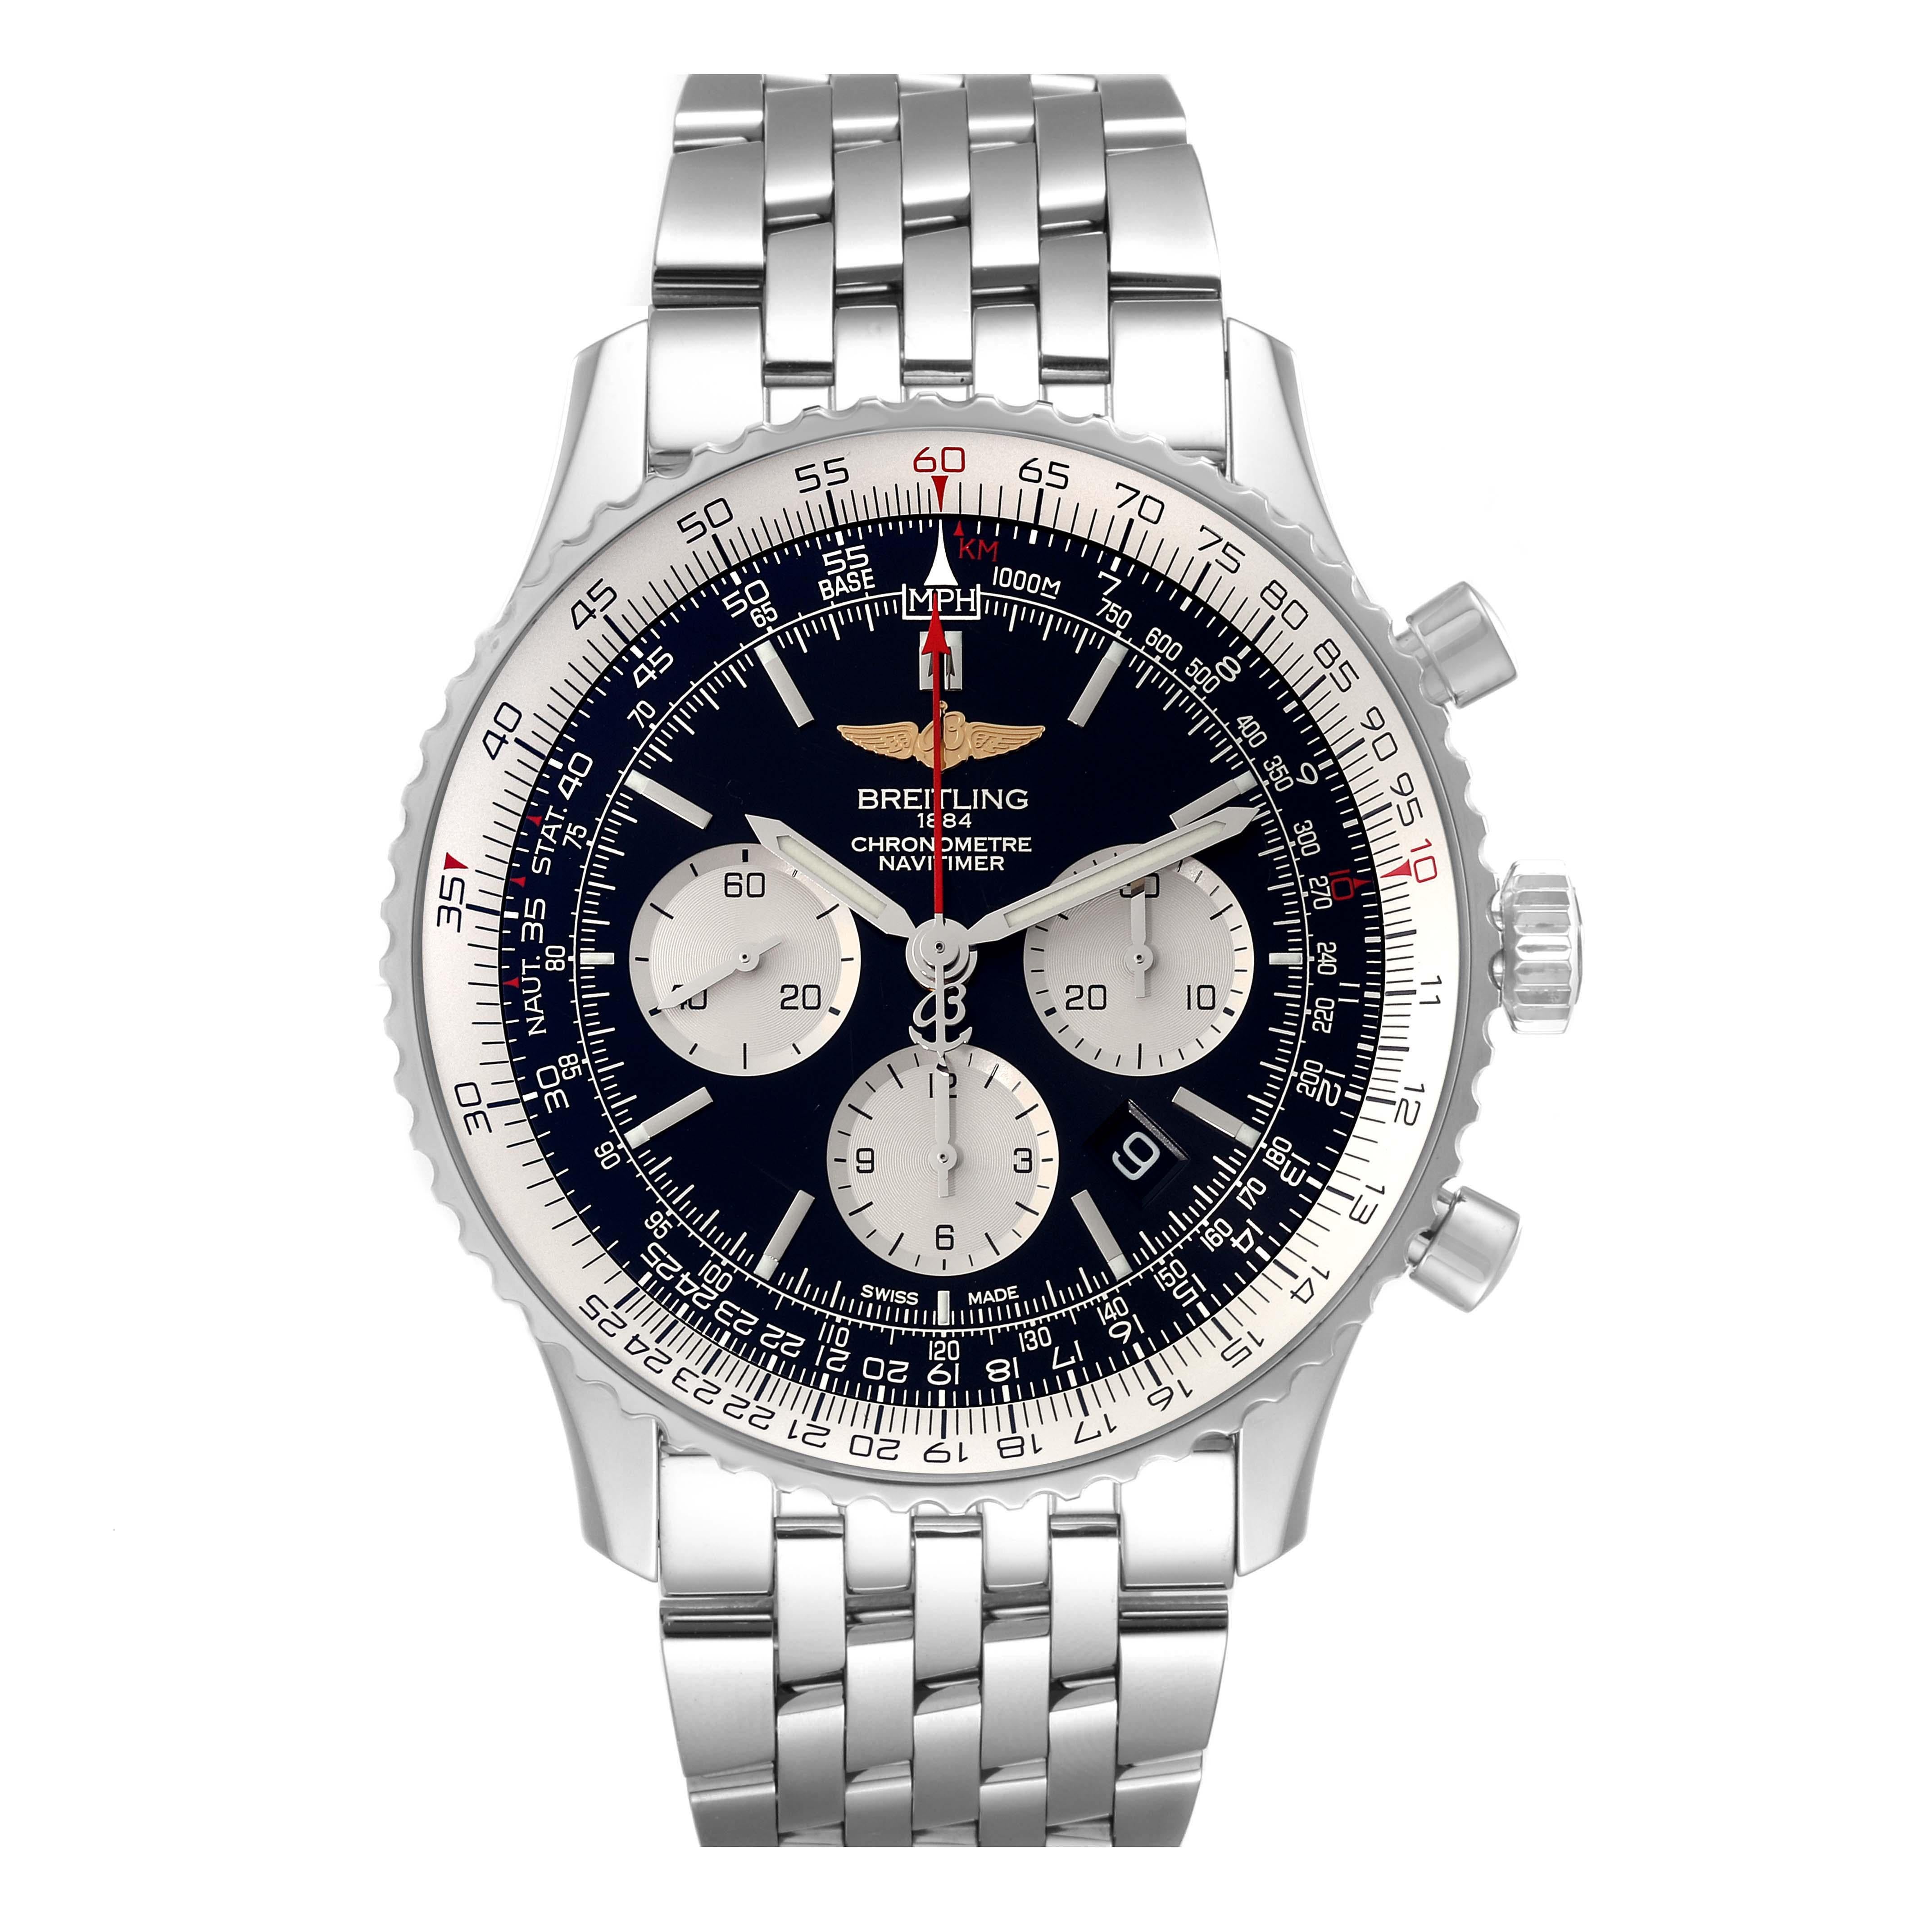 Breitling Navitimer 01 46mm Black Steel Dial Mens Watch AB0127 Box Card. Self-winding automatic officially certified chronometer movement. Chronograph function. Stainless steel case 46.0 mm in diameter. Case thickness 14.50 mm. Transparent